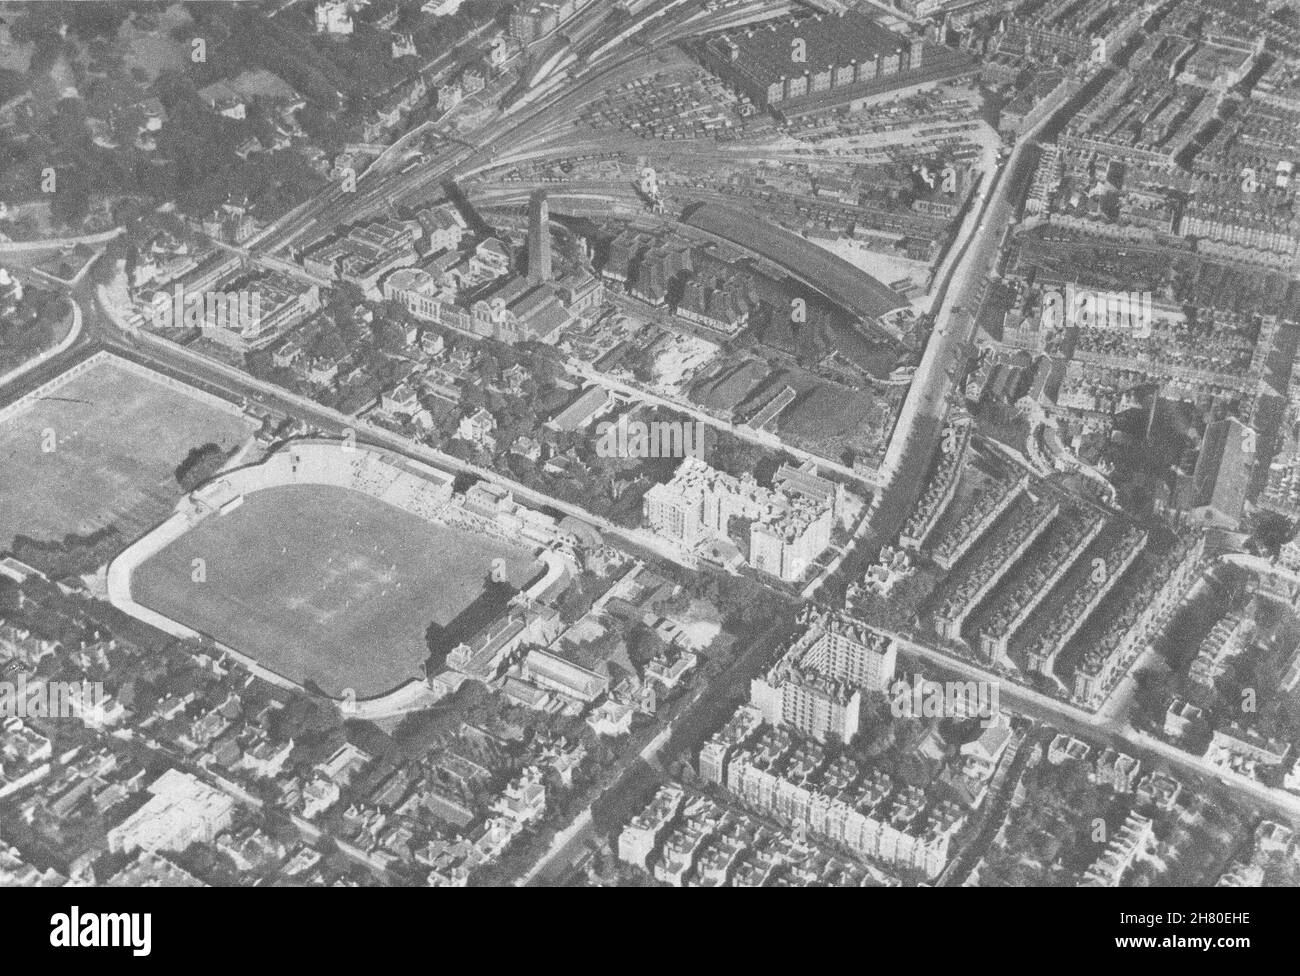 MARYLEBONE ST JOHN'S WOOD. Aerial view of Lord's cricket ground. 1926 print Stock Photo